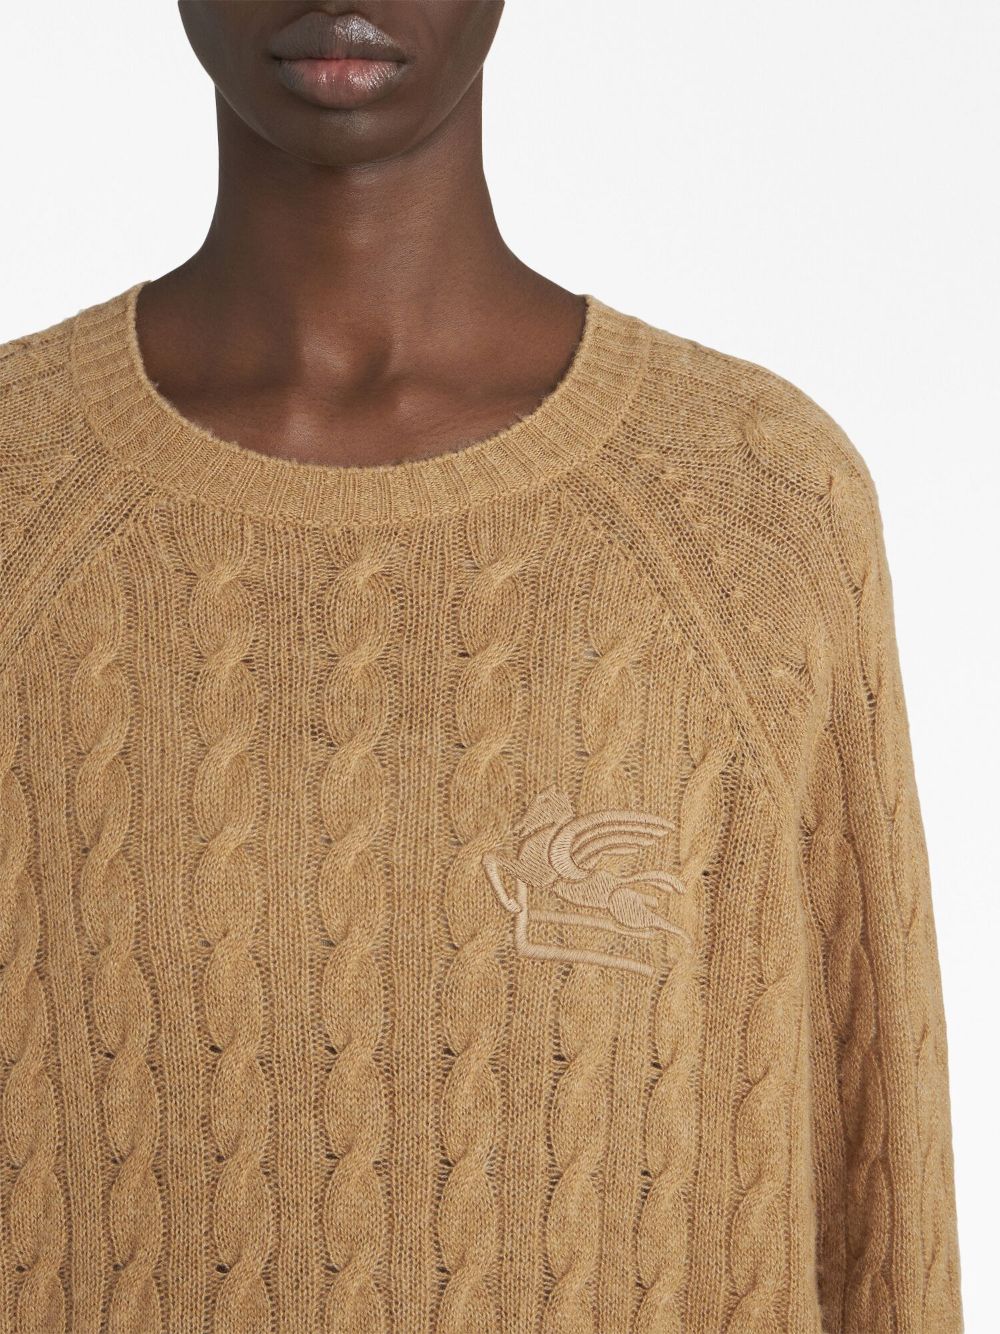 Tan Cable-Knit Jumper with Embroidered Logo by ETRO